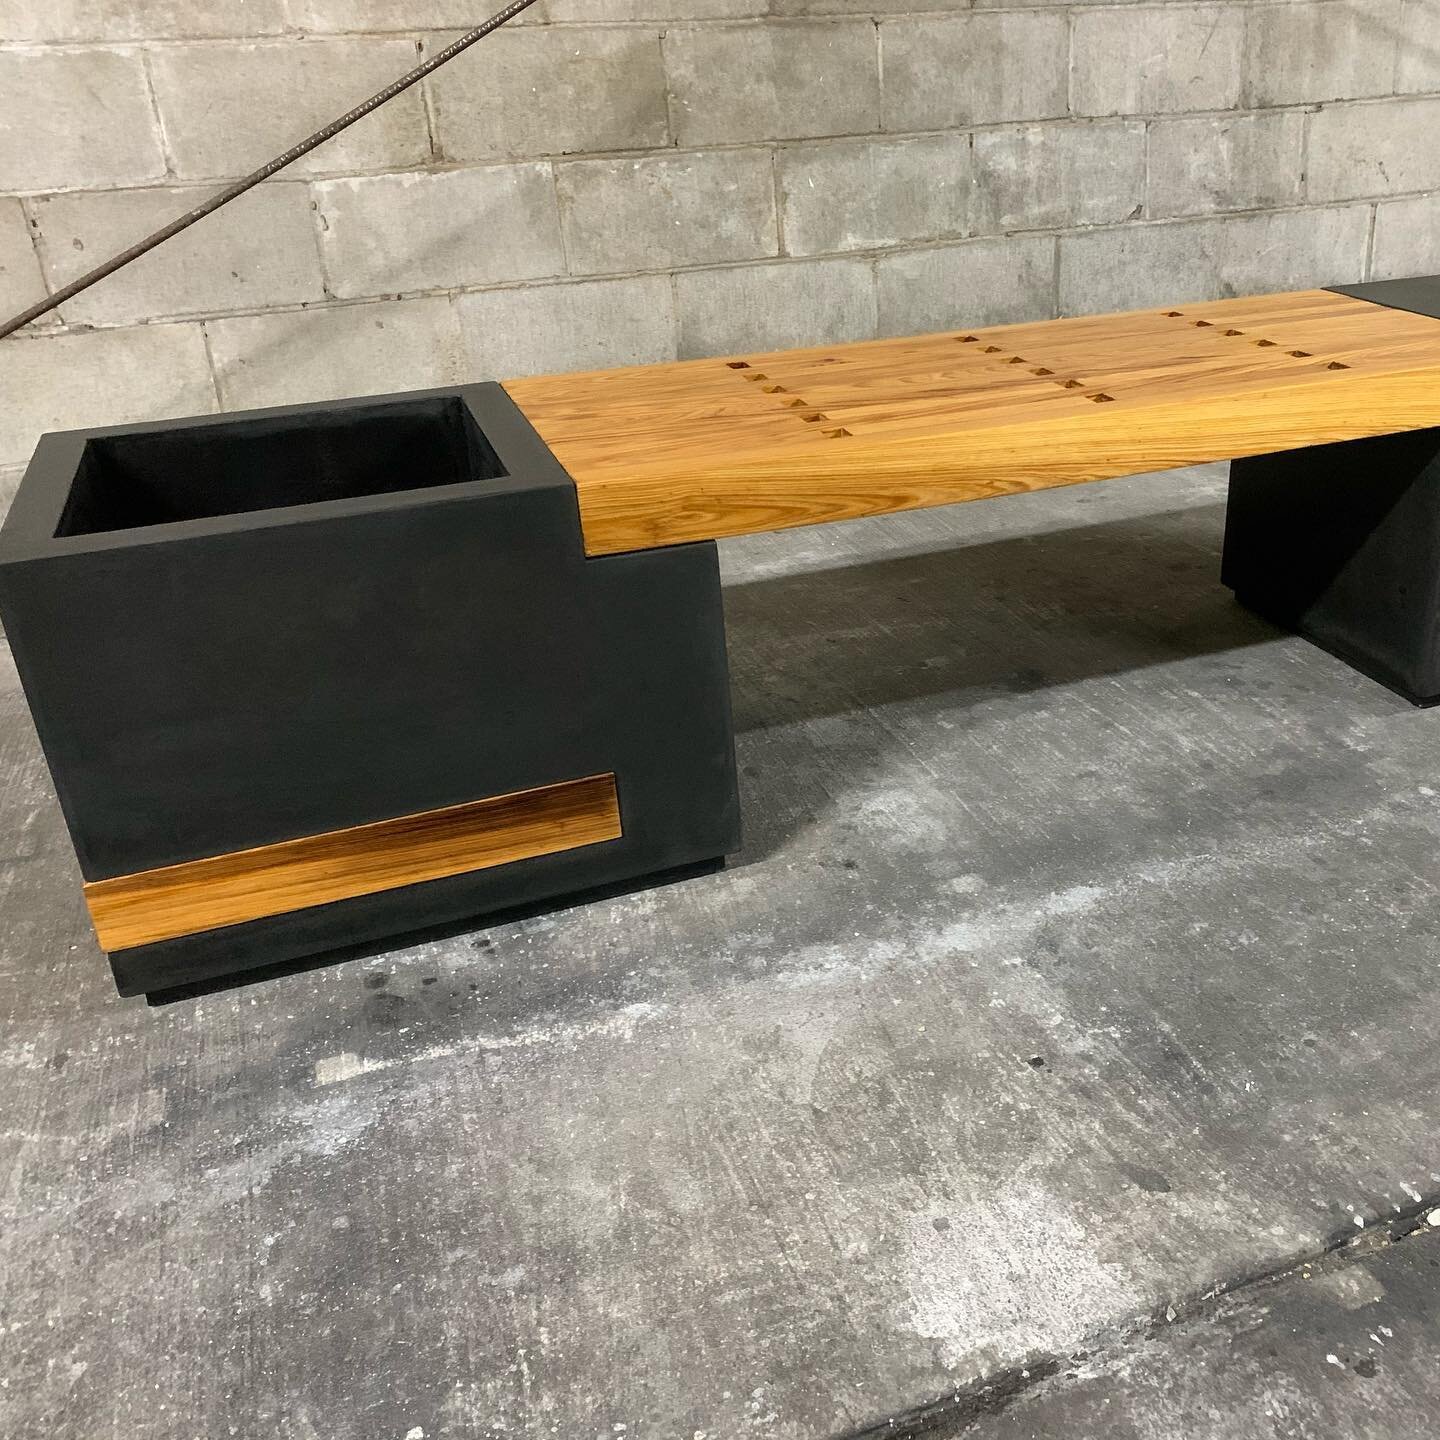 Fini, Acabado, Done! Custom cypress and concrete bench with built in planter. #planterbench #bench #concretebench #custom #customconcrete #concreteandwood #customconcretedesign #concretedesign #stogsconcretedesign #outdoorfurniture #concretefurniture